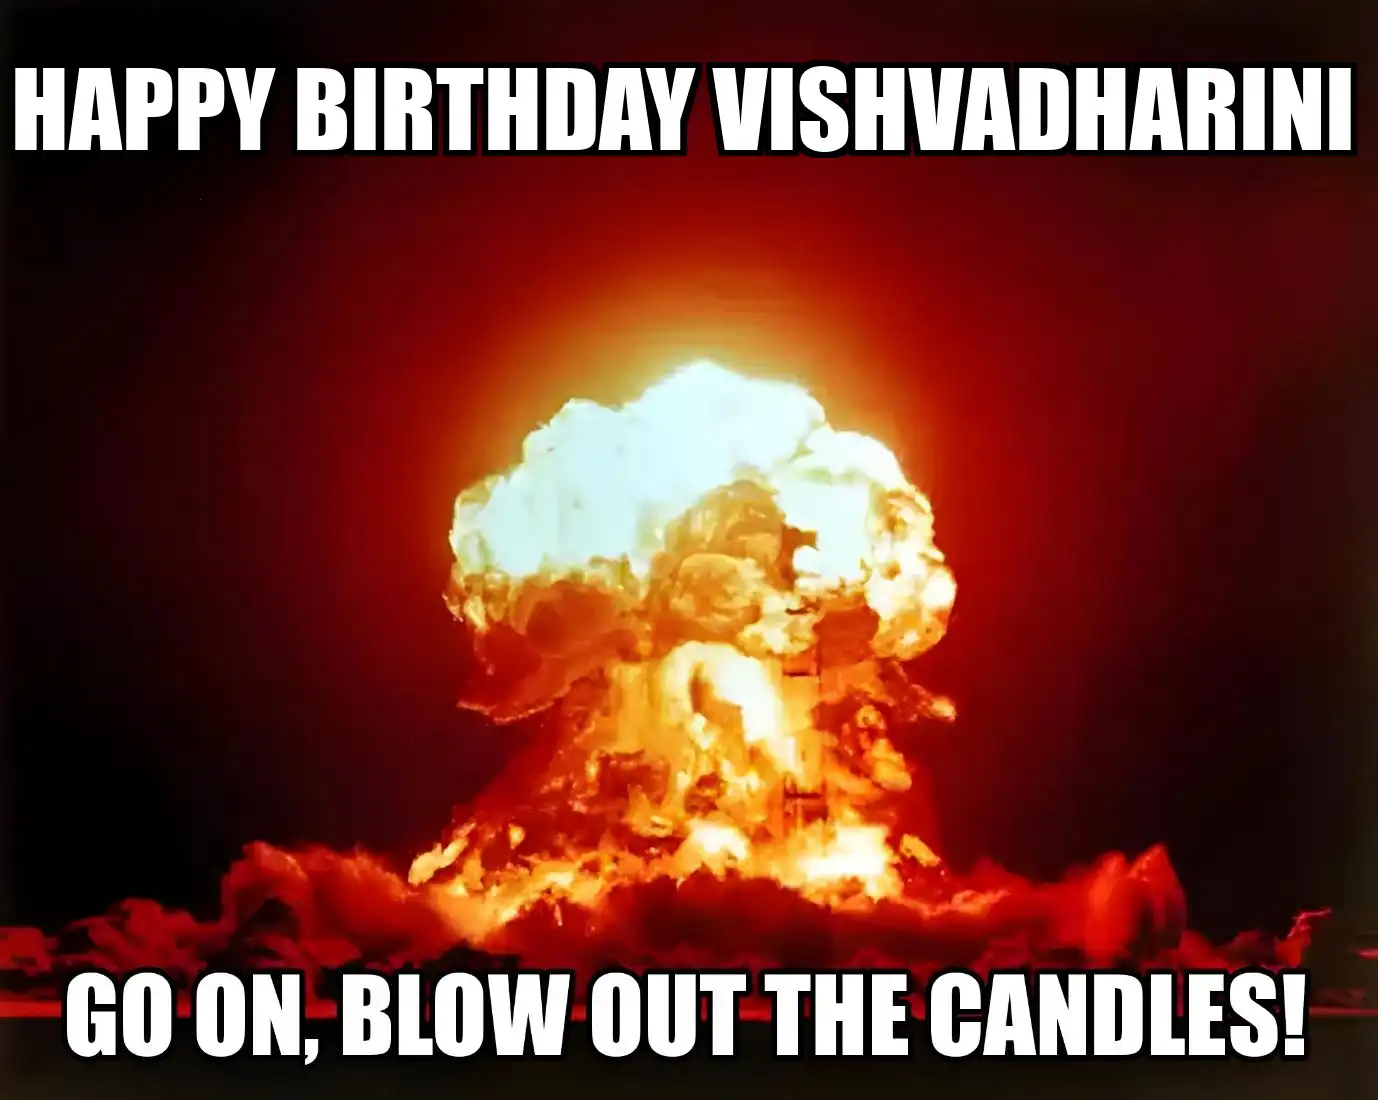 Happy Birthday Vishvadharini Go On Blow Out The Candles Meme